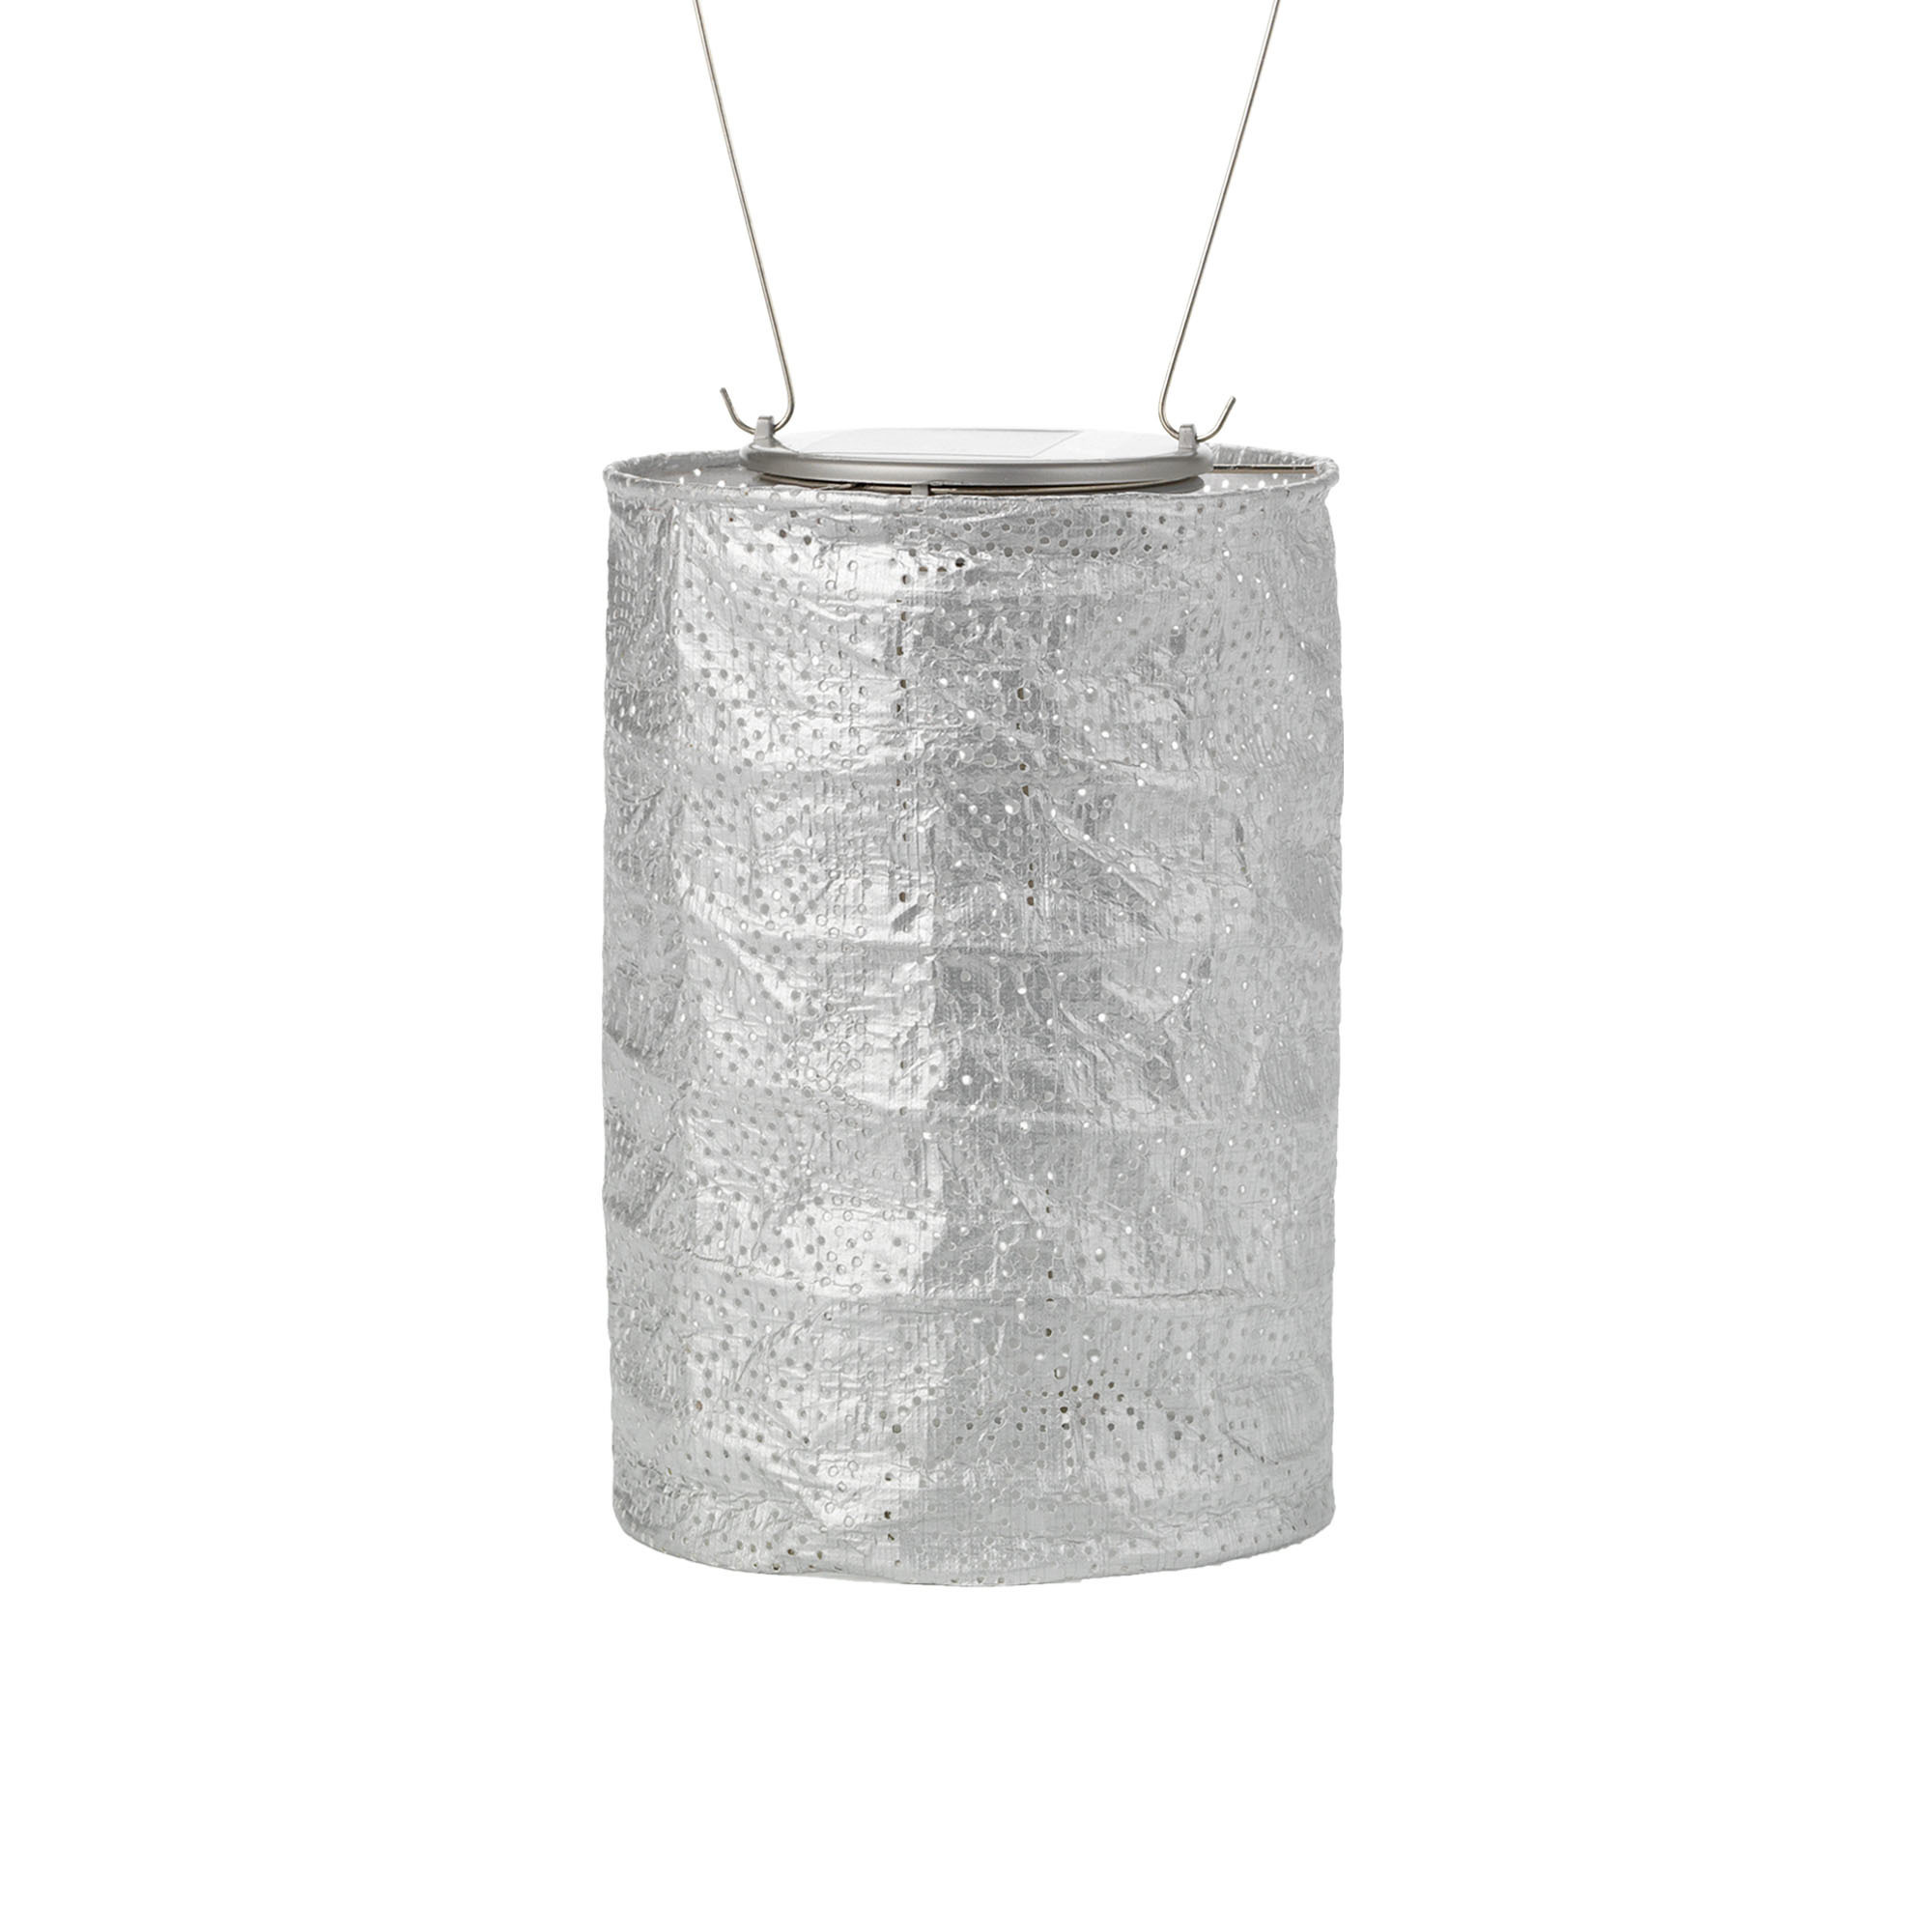 Allsop Home and Garden, Soji Stella Cylinder - Silver, Color Silver, Included (qty.) 1 Model 30534